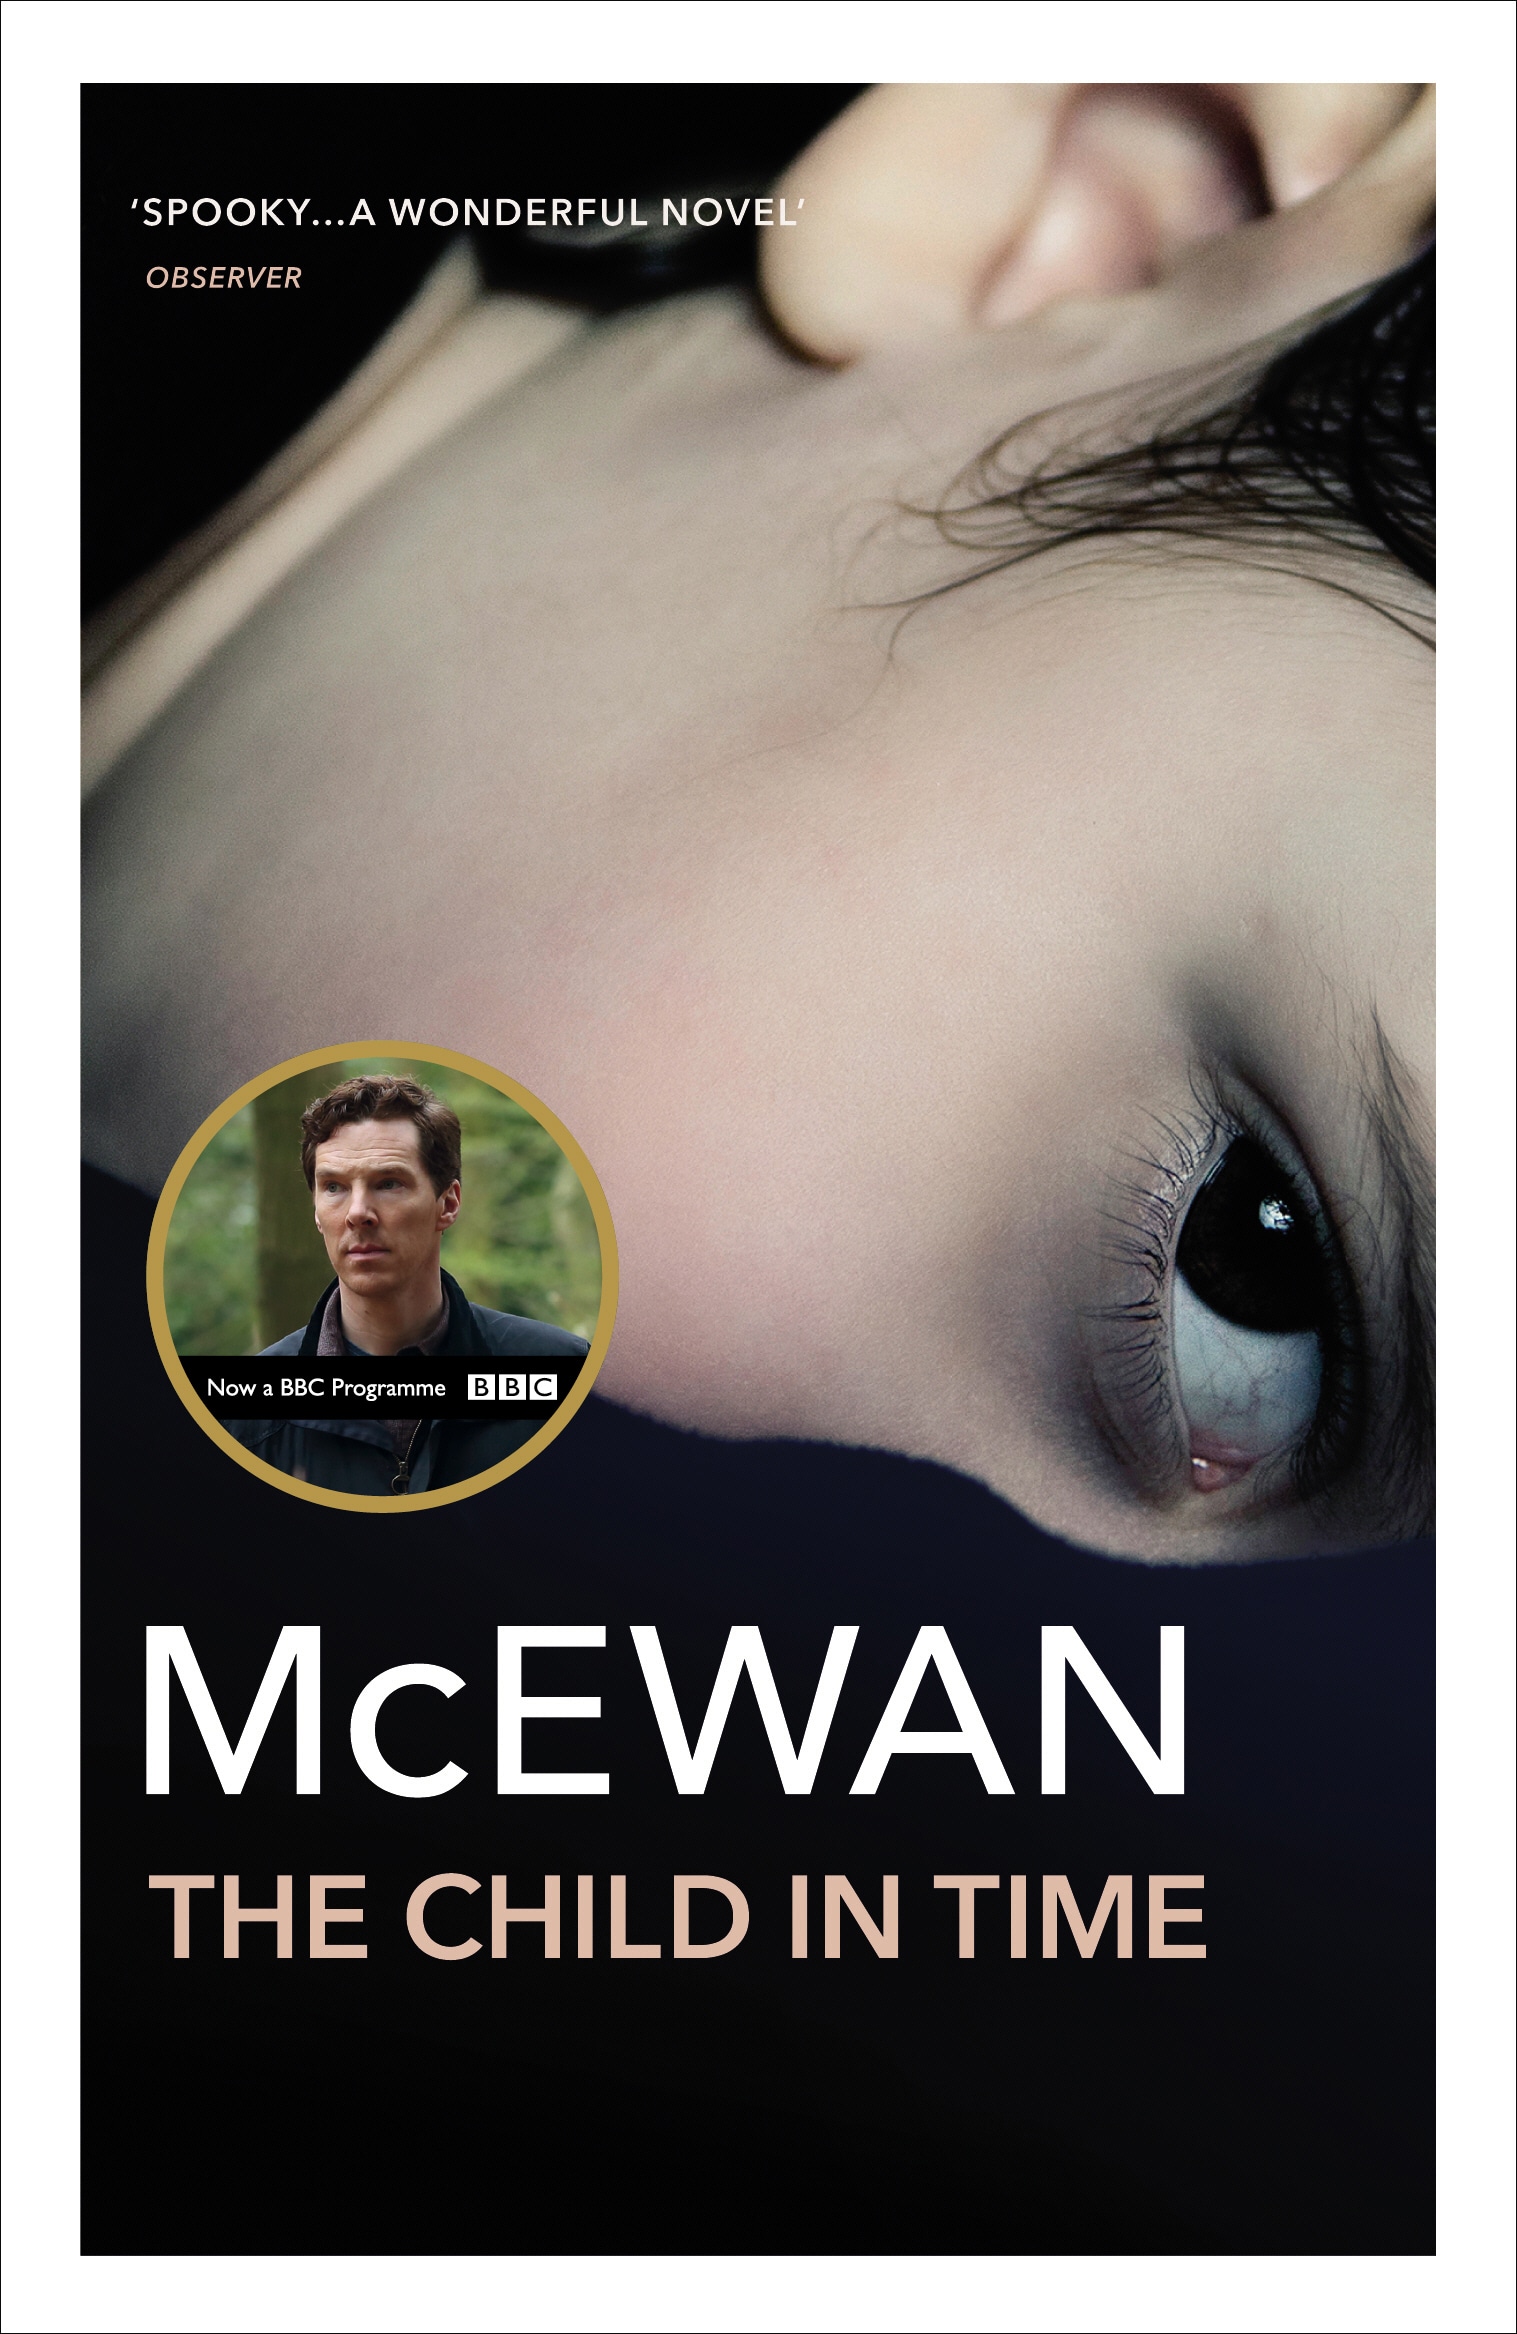 Book “The Child In Time” by Ian McEwan — June 5, 1997